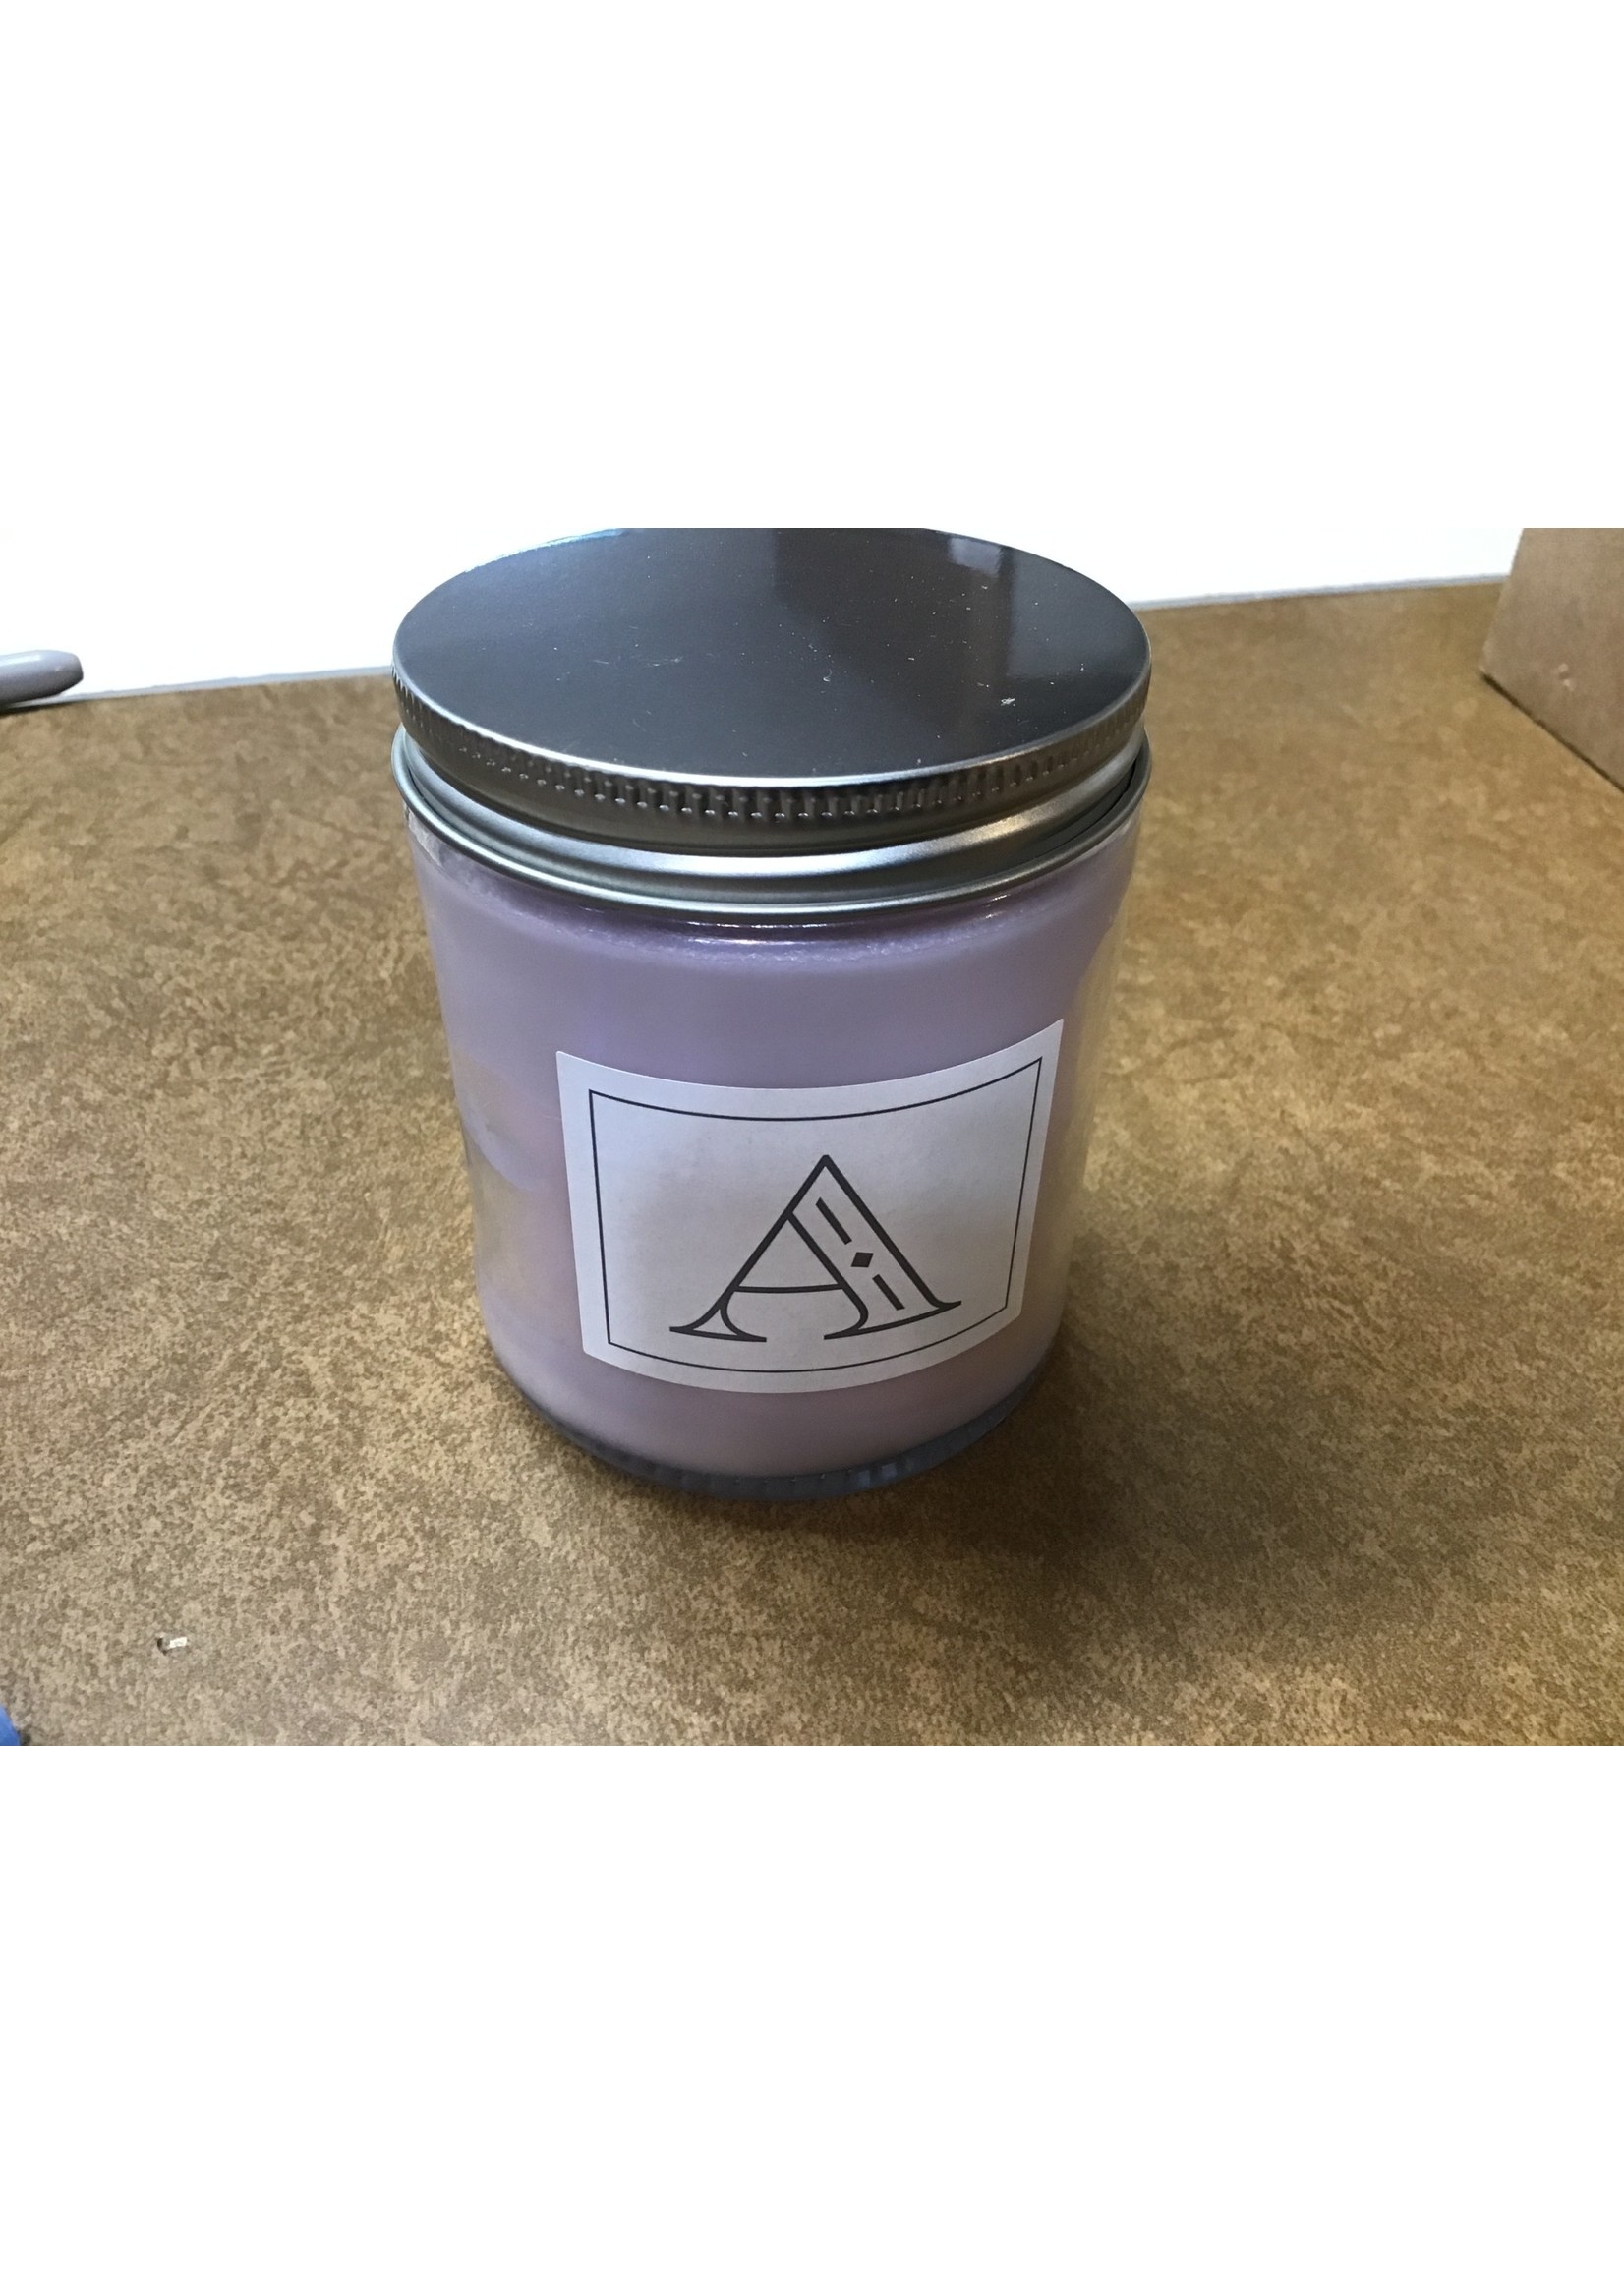 “A” monogrammed candle Rose Petal